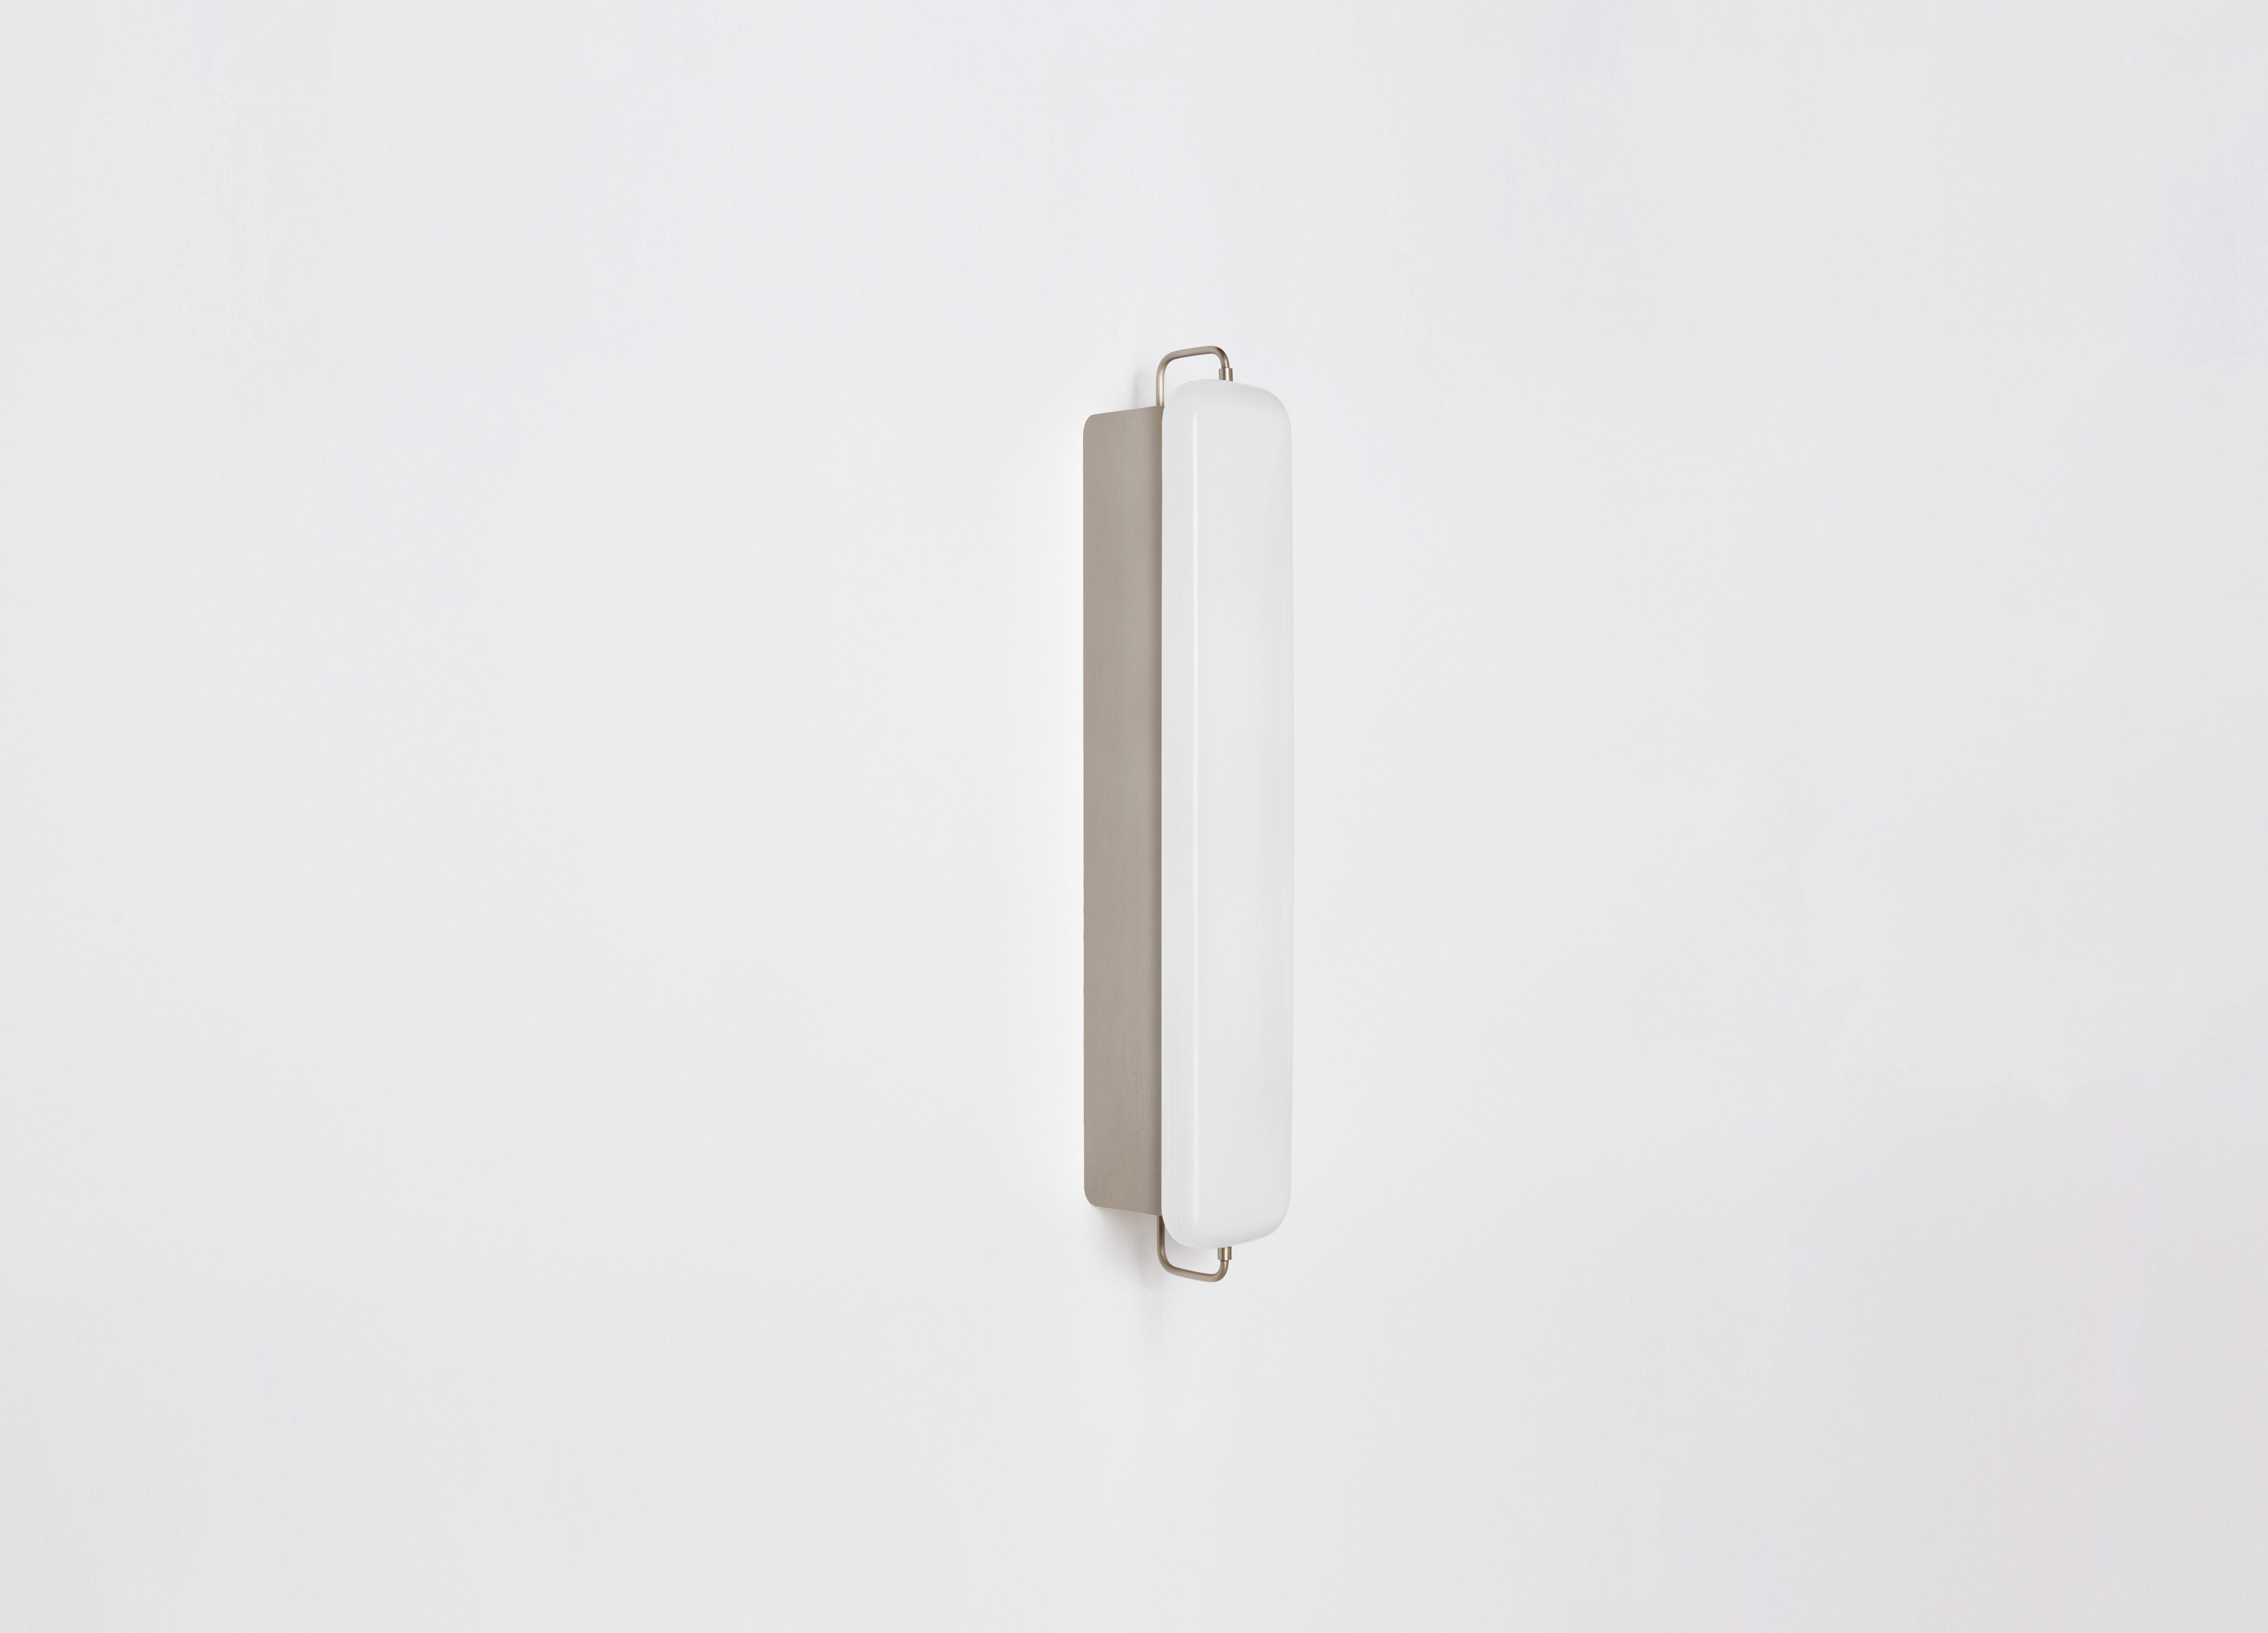 PARK III utilizes an elongated pillow-shaped milk glass form, set against a slender enameled form. The fixture acts as both a light box and wall-washer, spreading light both out and reflecting light against the wall. This fixture is designed to fit